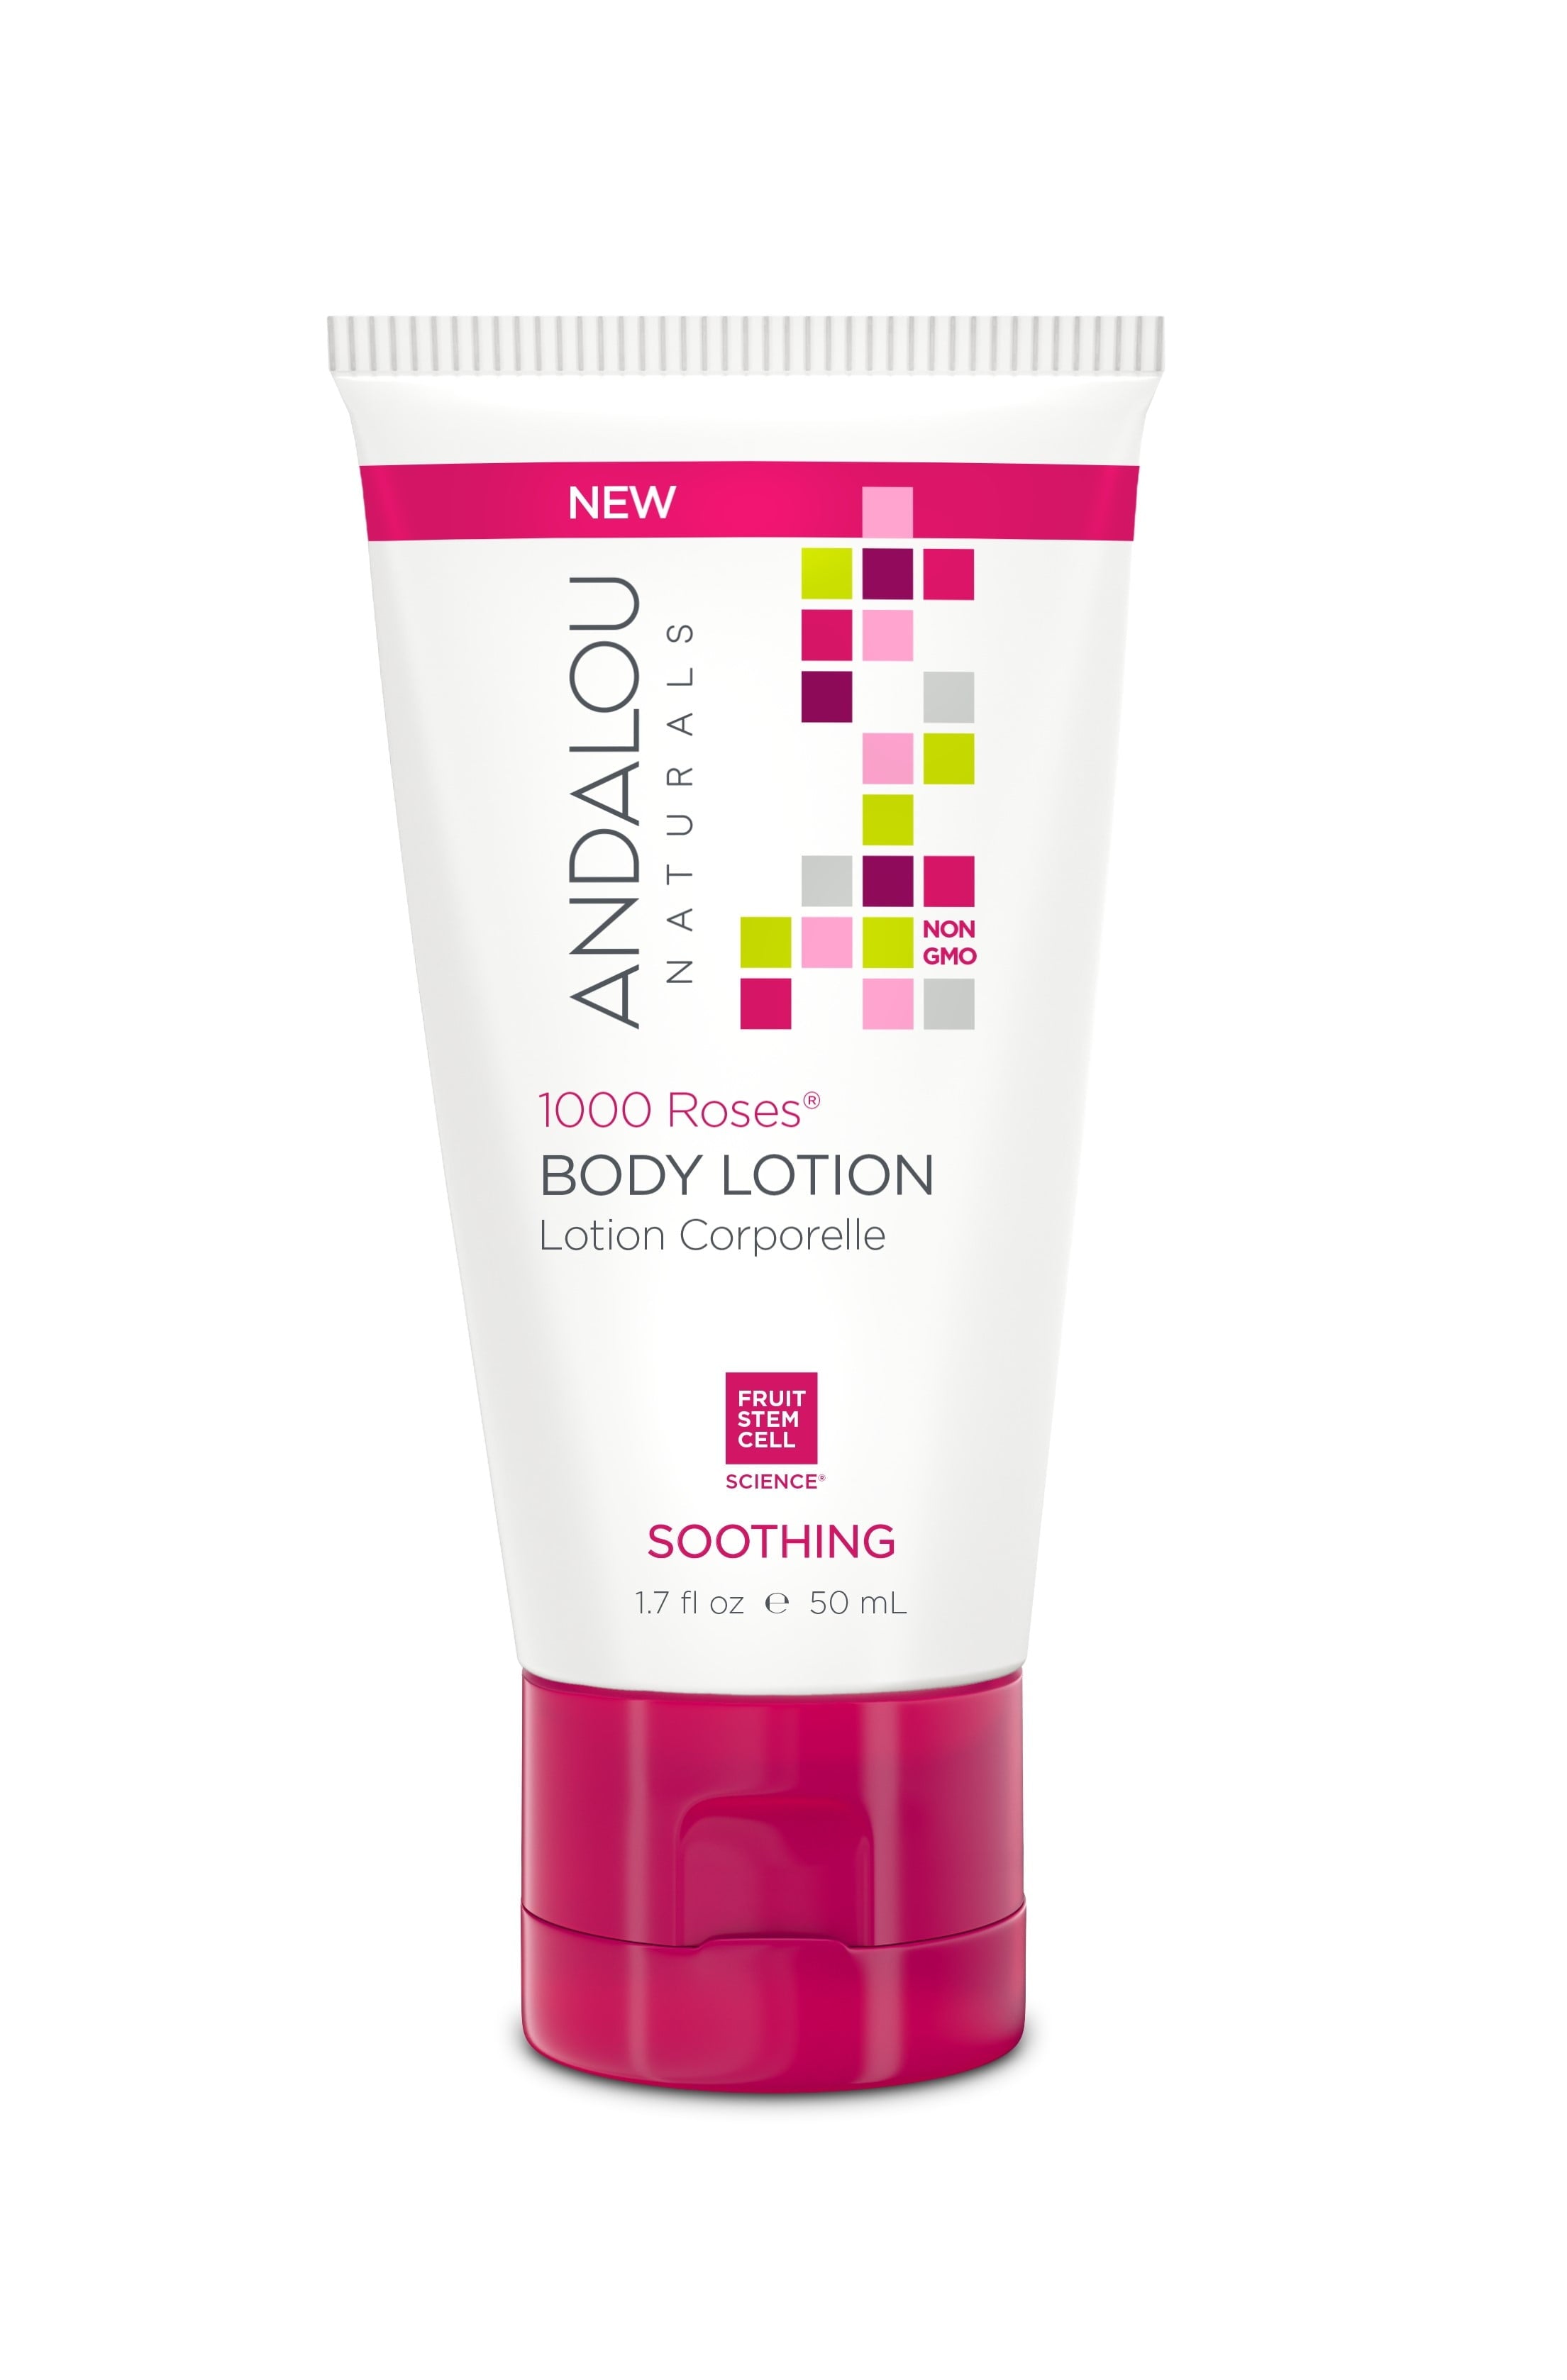 Andalou Naturals Soothing Body Lotion, 1000 Roses, 1.7 oz Bottle